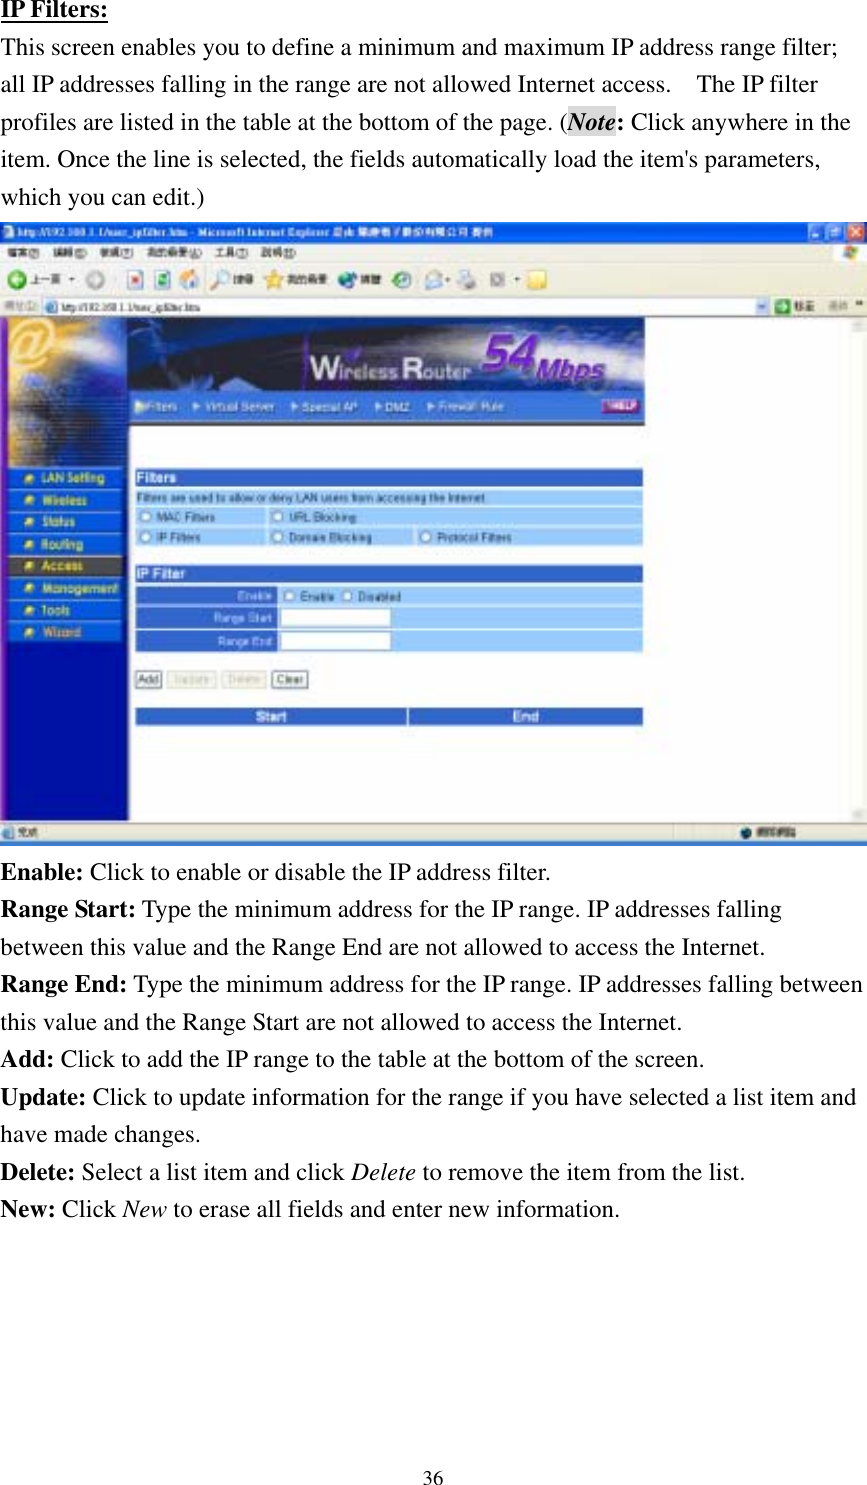  36IP Filters: This screen enables you to define a minimum and maximum IP address range filter; all IP addresses falling in the range are not allowed Internet access.    The IP filter profiles are listed in the table at the bottom of the page. (Note: Click anywhere in the item. Once the line is selected, the fields automatically load the item&apos;s parameters, which you can edit.)  Enable: Click to enable or disable the IP address filter. Range Start: Type the minimum address for the IP range. IP addresses falling between this value and the Range End are not allowed to access the Internet. Range End: Type the minimum address for the IP range. IP addresses falling between this value and the Range Start are not allowed to access the Internet. Add: Click to add the IP range to the table at the bottom of the screen. Update: Click to update information for the range if you have selected a list item and have made changes. Delete: Select a list item and click Delete to remove the item from the list. New: Click New to erase all fields and enter new information.  